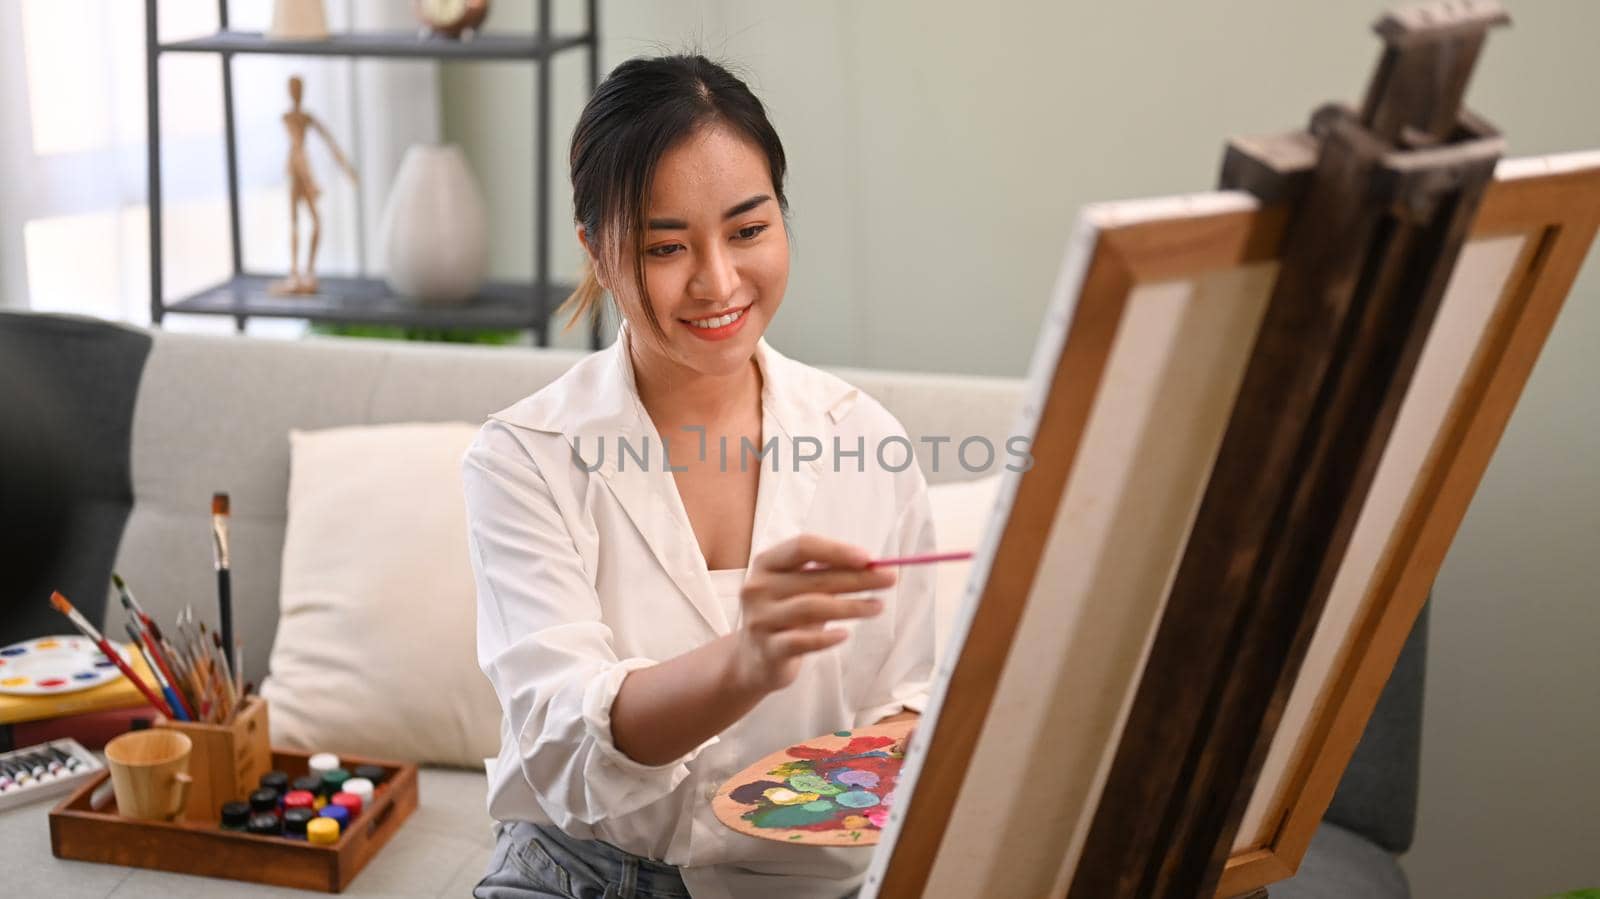 Smiling young woman painting picture on canvas with oil paints in bright cozy living room. Art, creative hobby and leisure activity concept by prathanchorruangsak